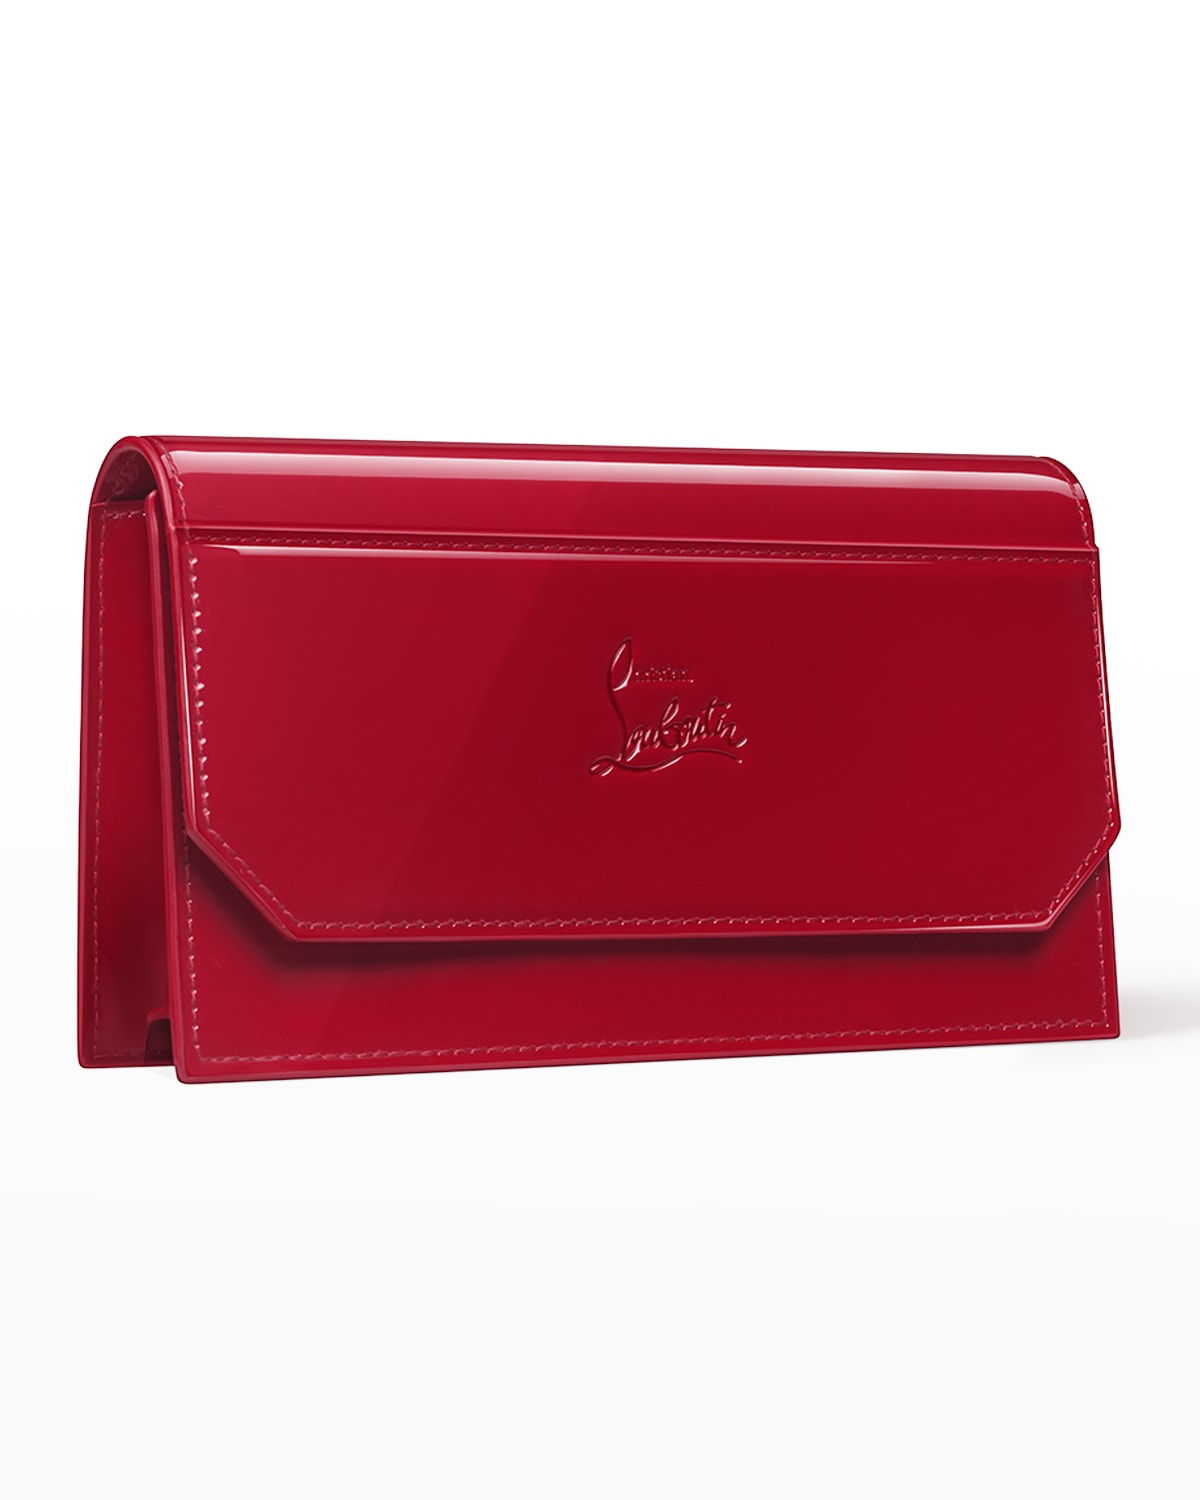 Red Vinyl Pouch, Yours with any $200 Christian Louboutin Purchase